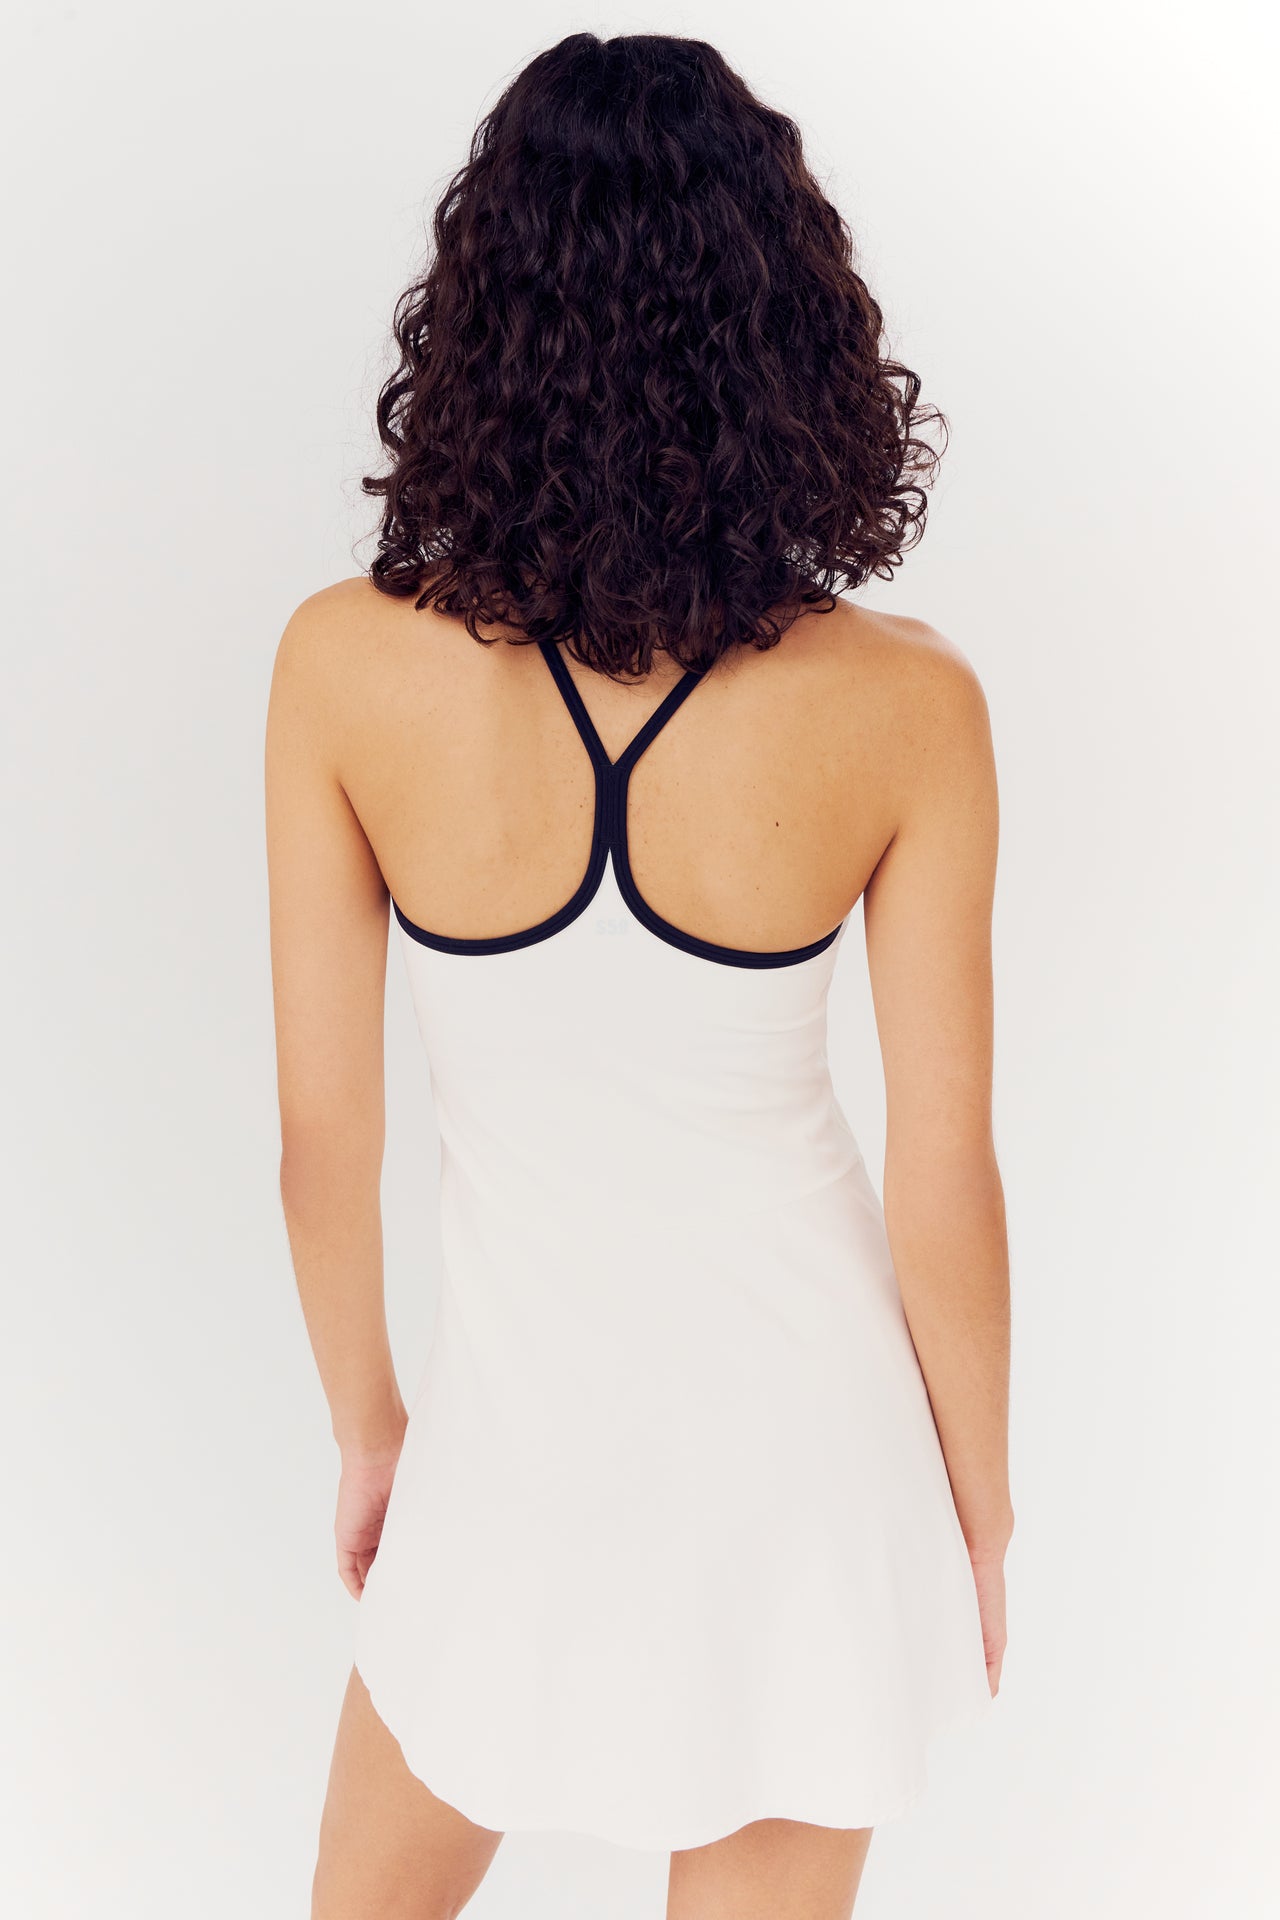 Rear view of a woman with curly hair wearing a SPLITS59 Simona Airweight Tank Dress - White/Indigo with a black spandex strap design.